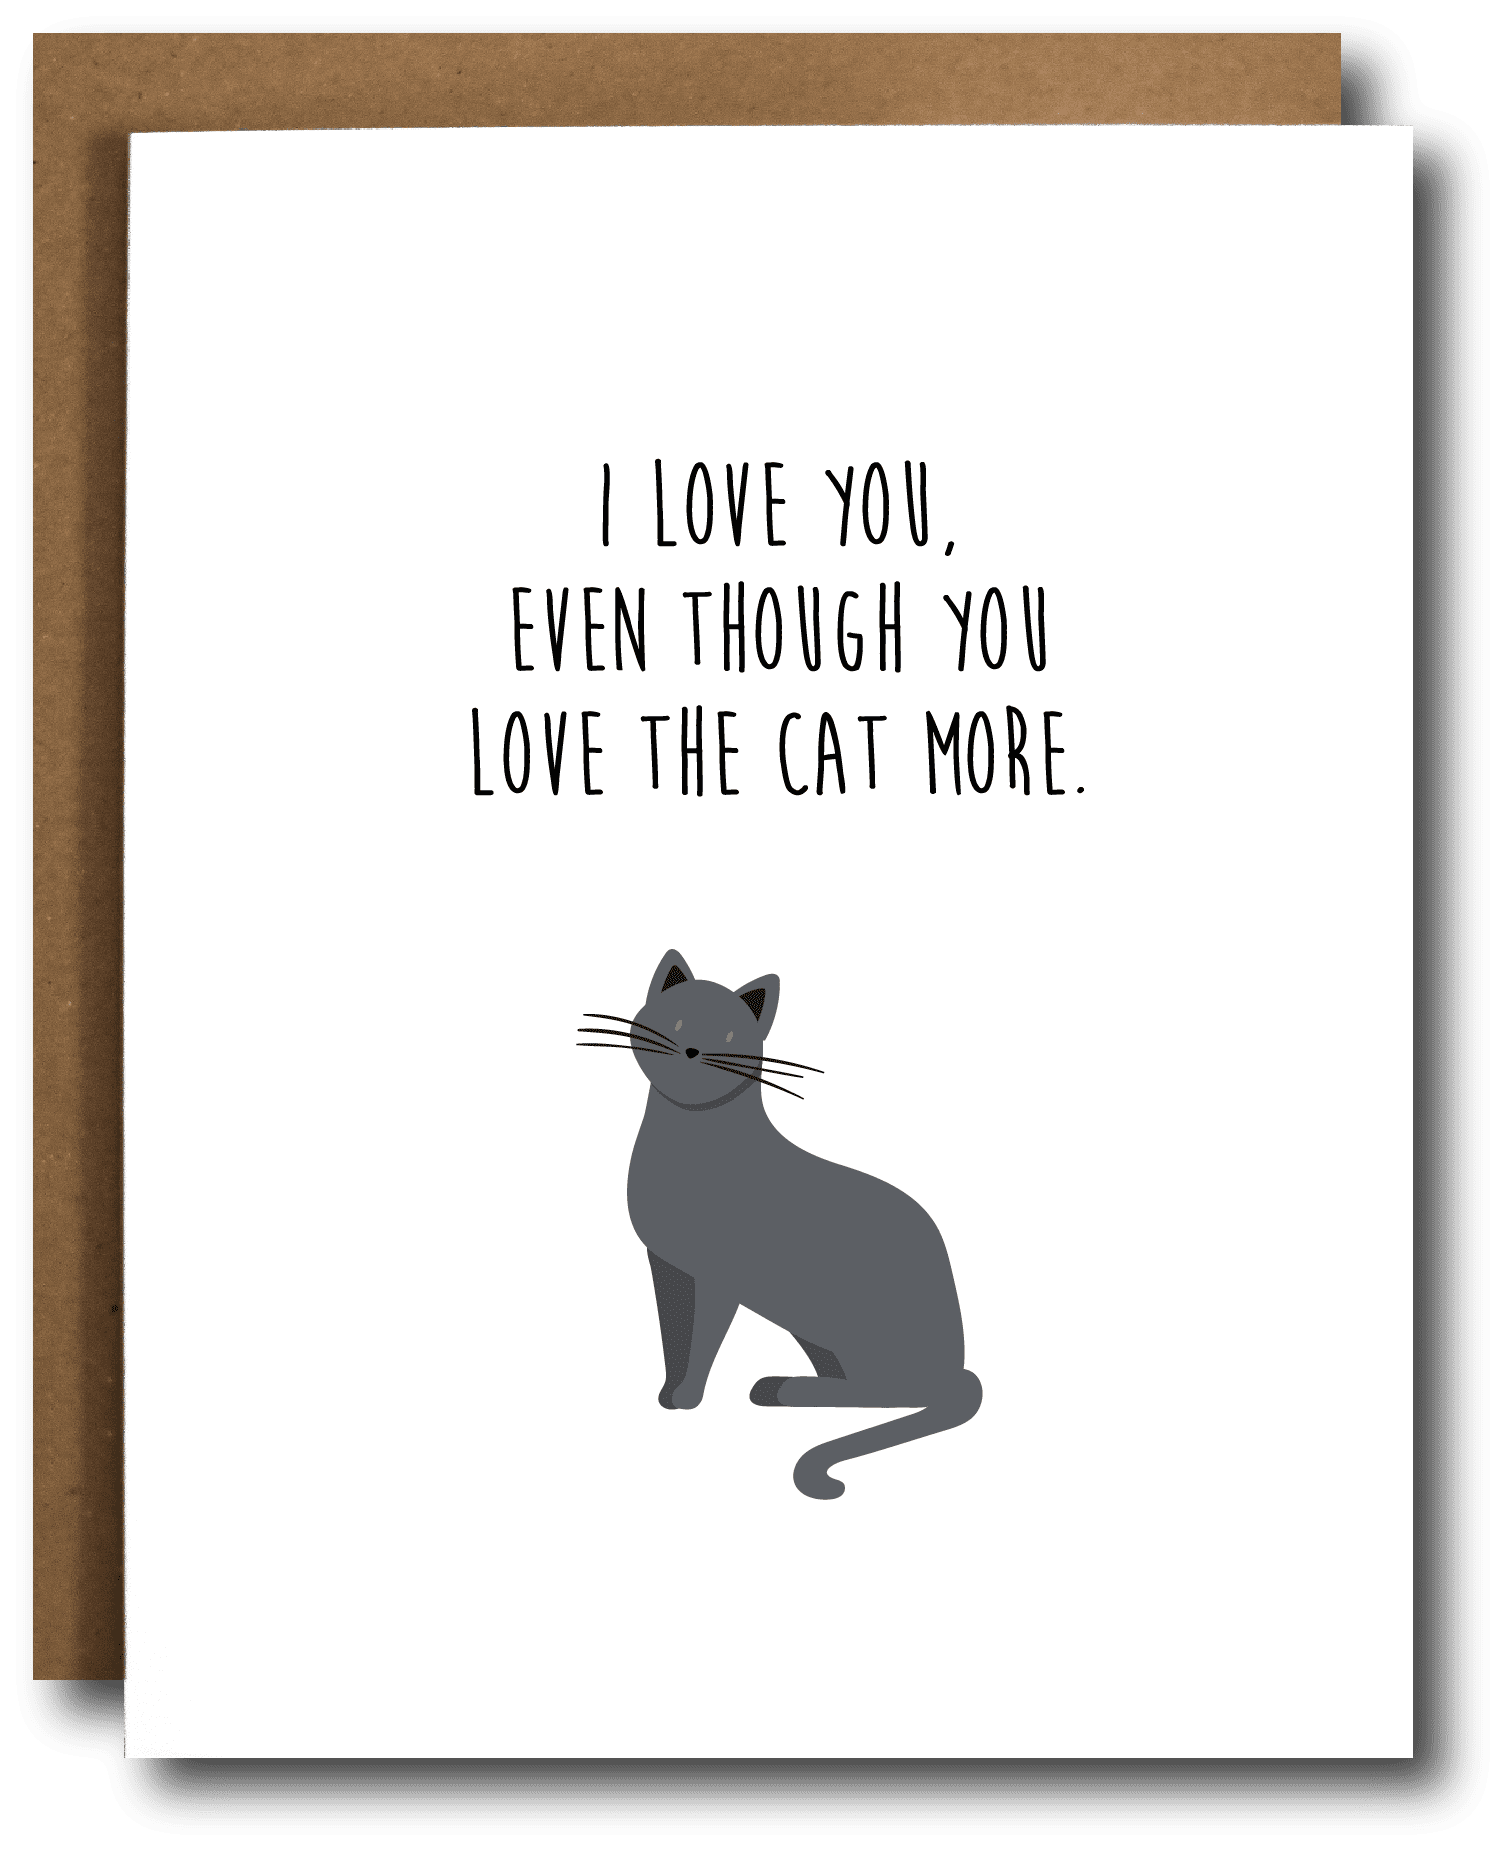 "Love the Cat More" Greeting Card